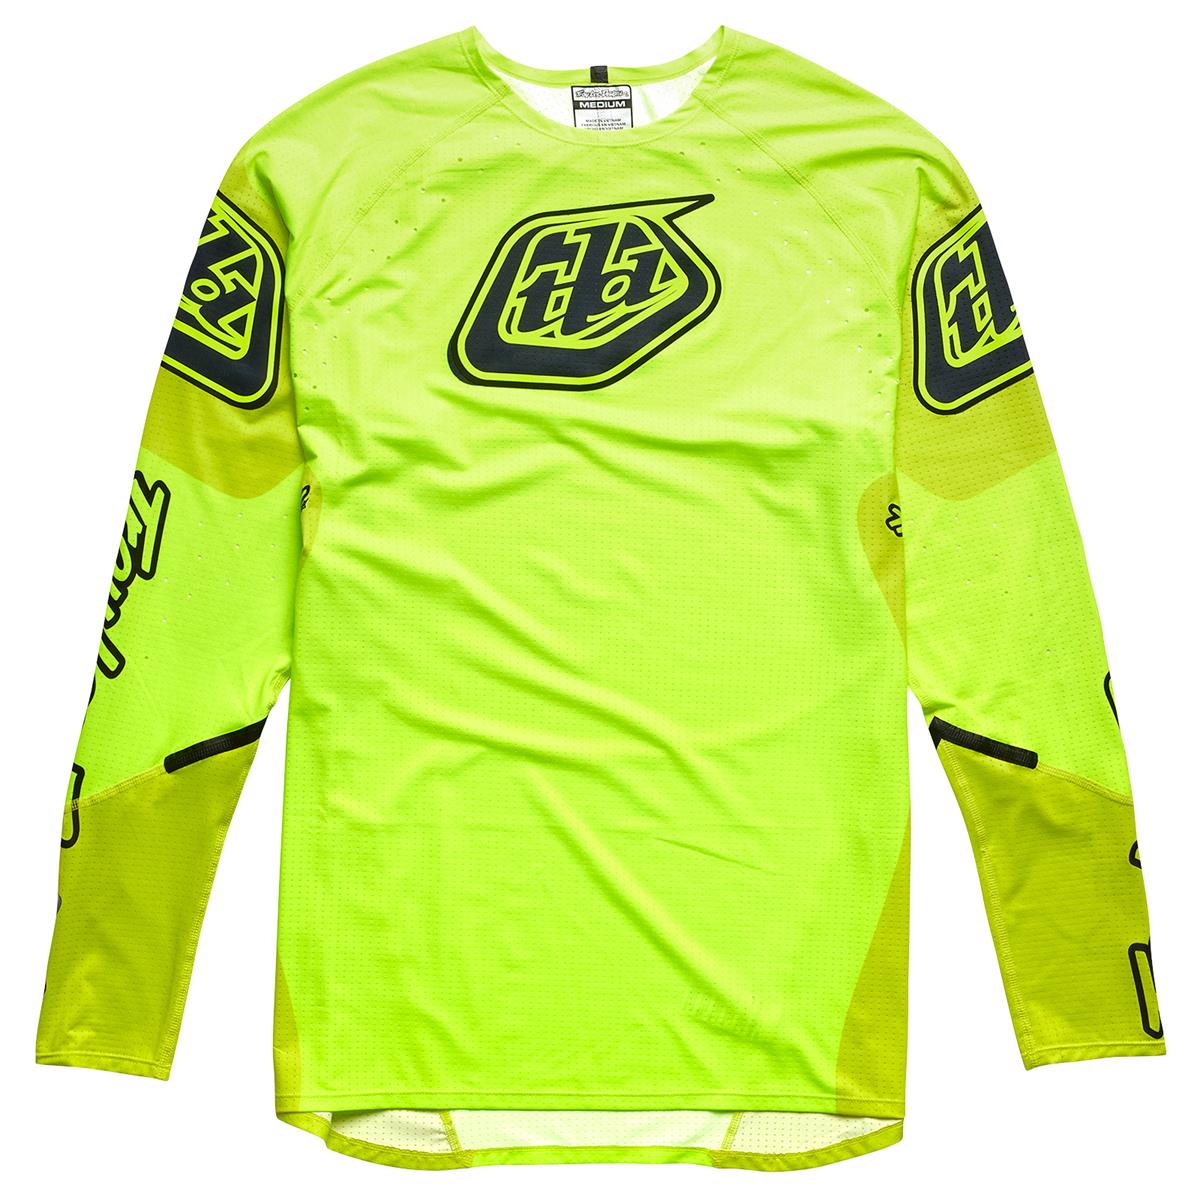 Troy Lee Designs Maglia MTB manica lunga Sprint Ultra Sequence - Giallo Fluo